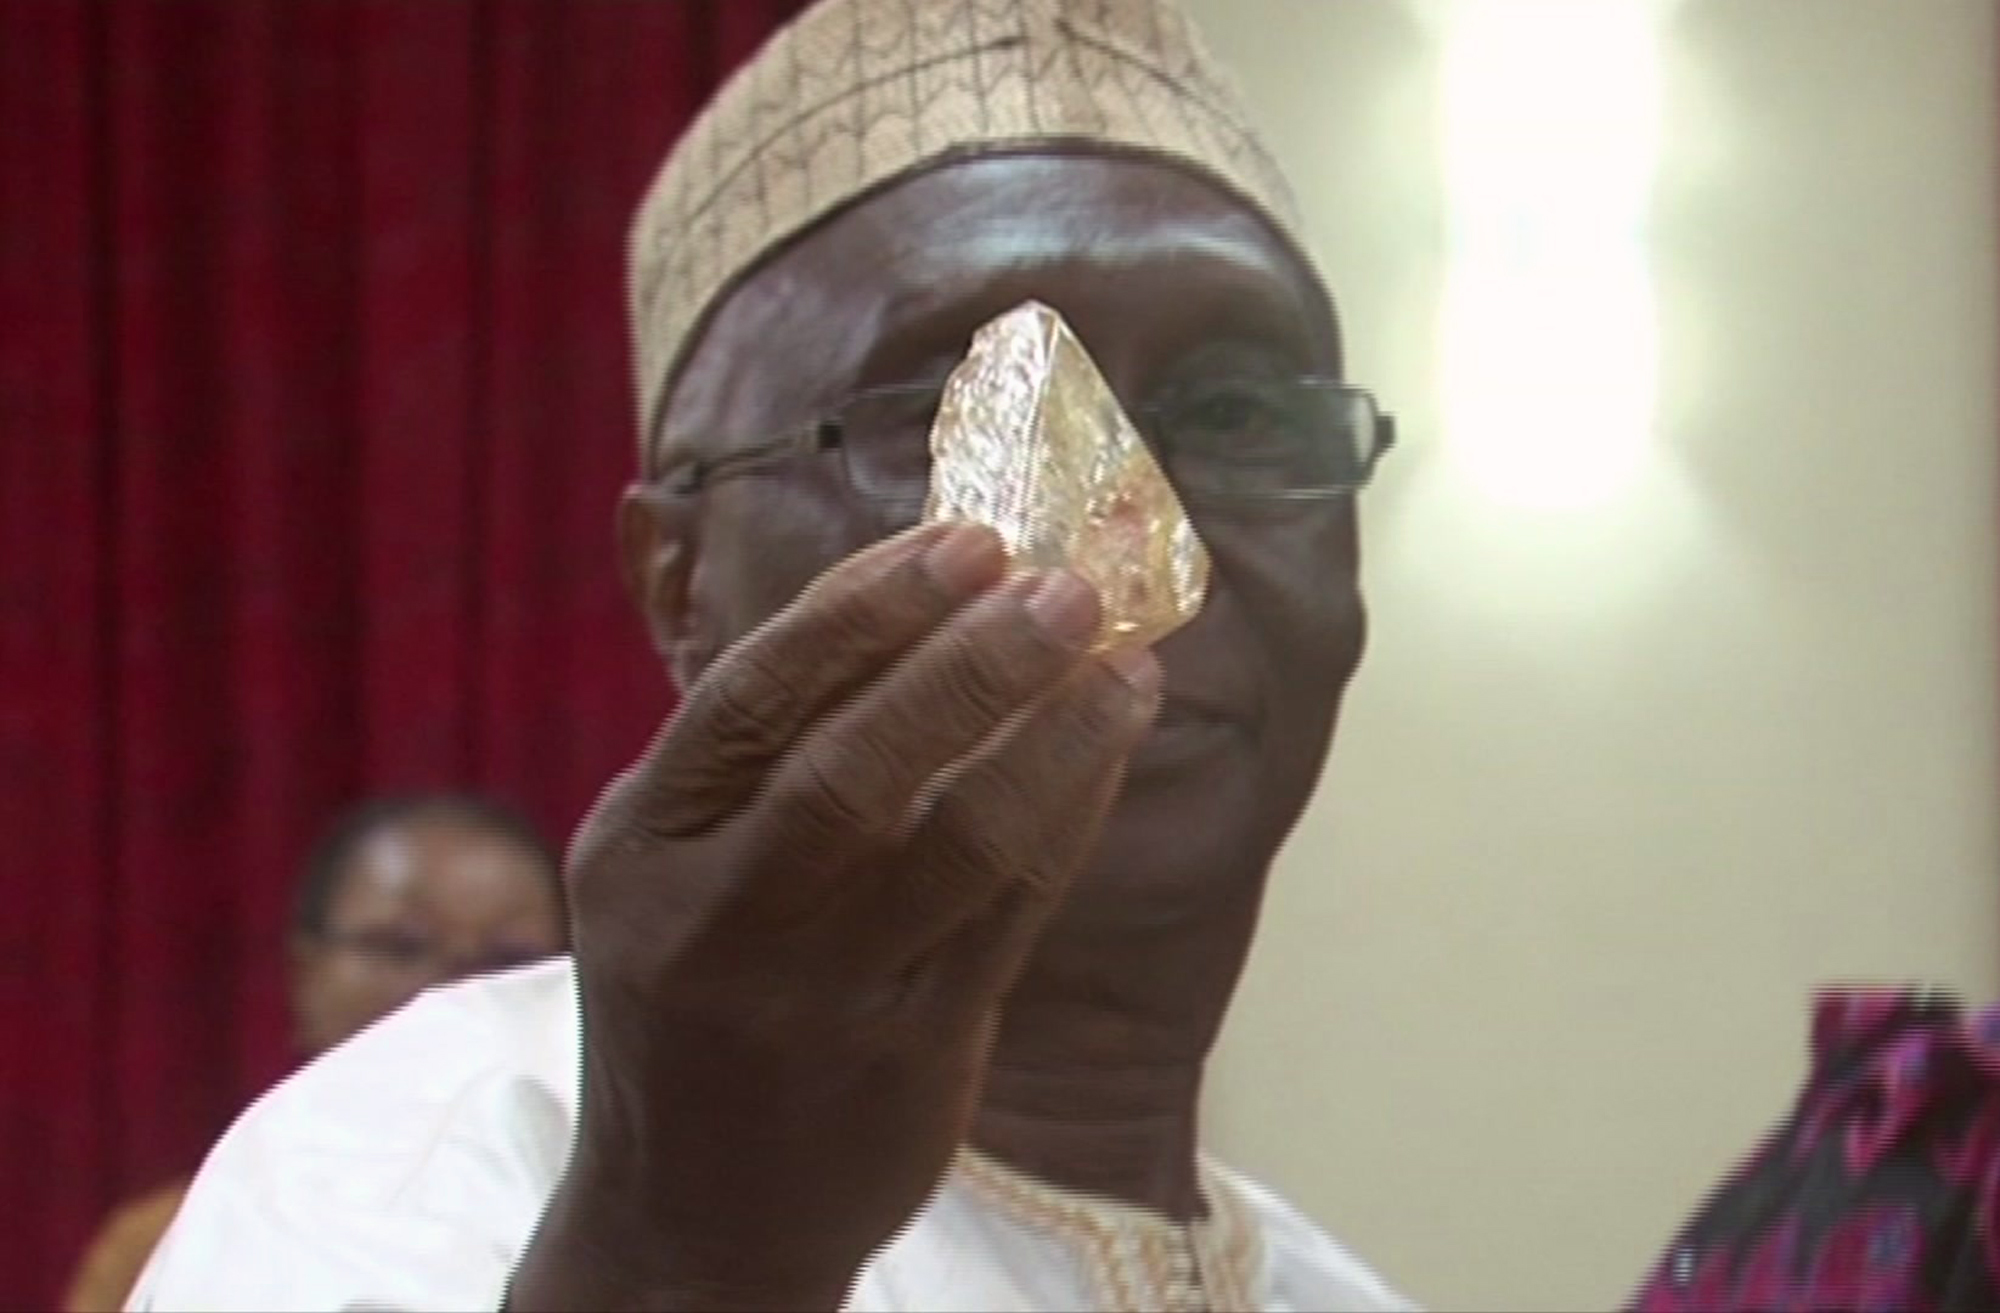 Miner Finds Enormous 706-Carat Diamond, Promptly Hands It Over To The Government